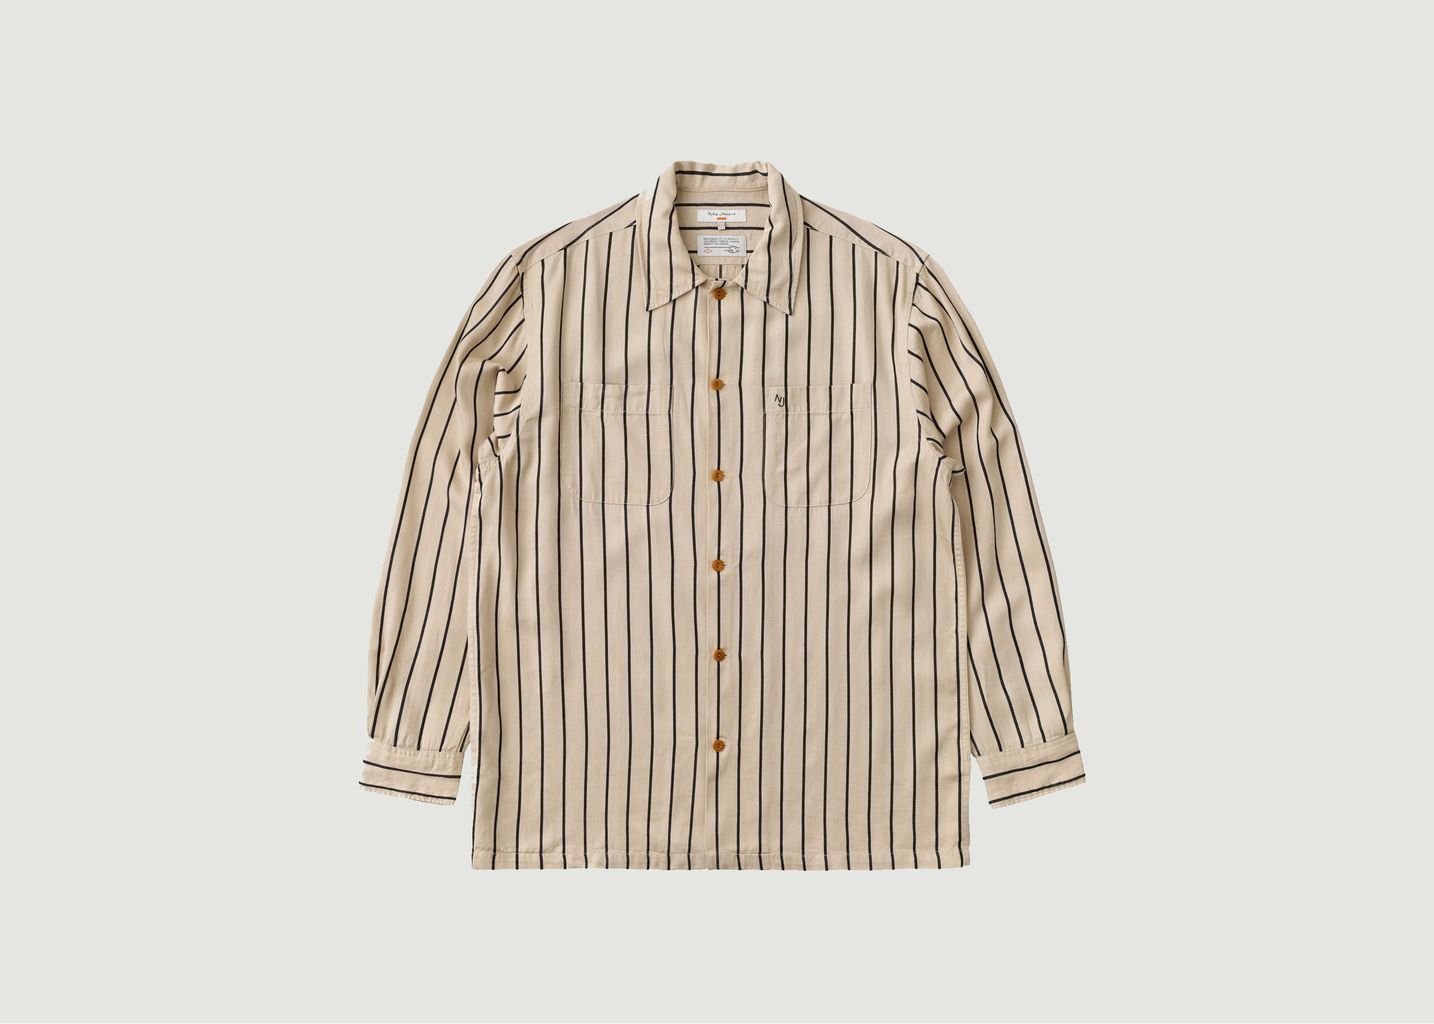 Nudie Jeans Vincent Striped Shirt